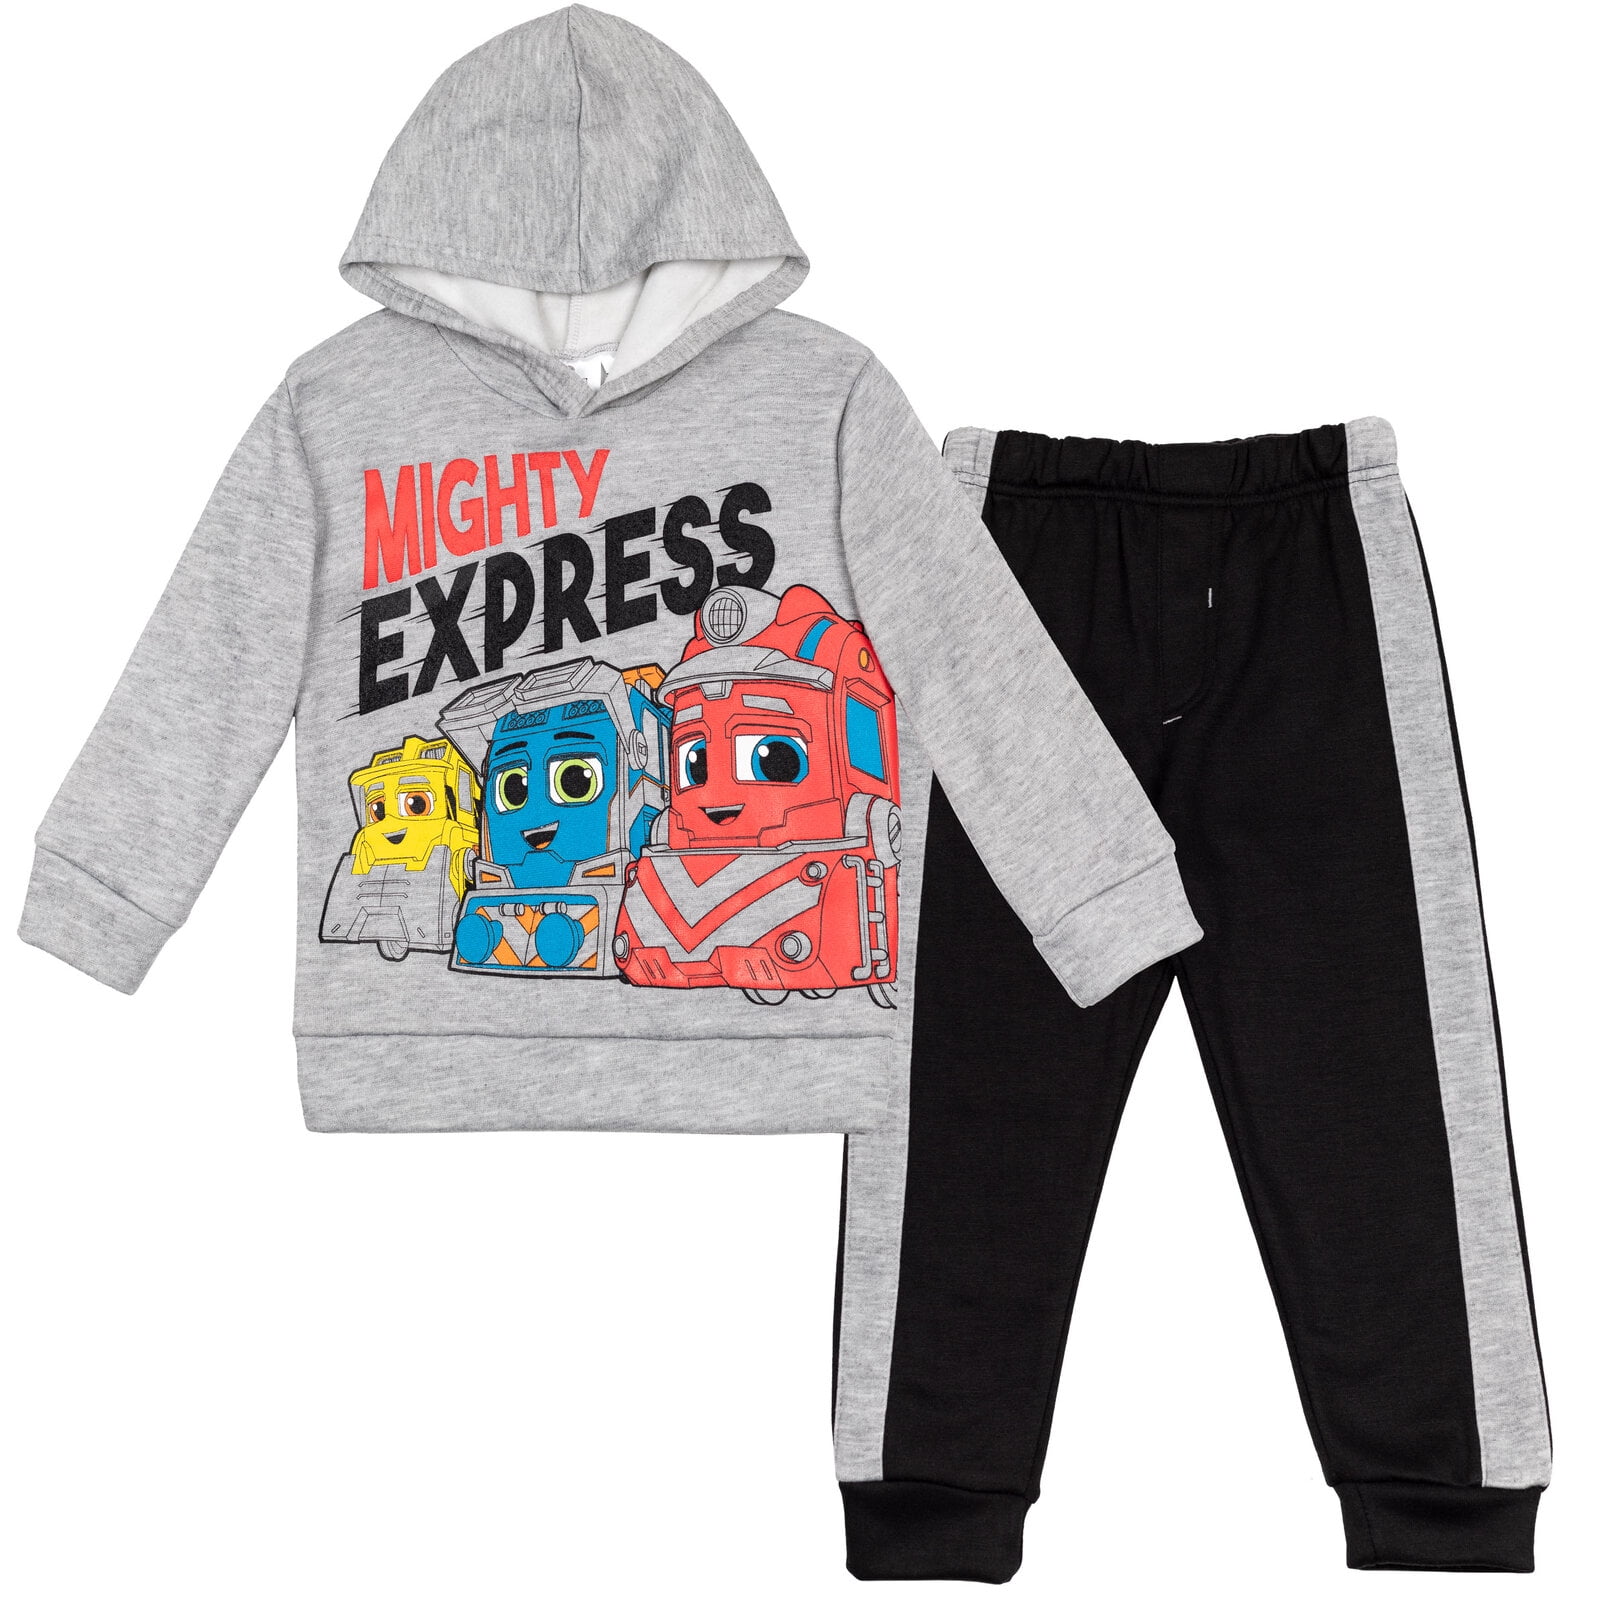 Mighty Express Nate Milo Brock Toddler Boys Pullover Hoodie & Pants  Gray/Black 2T